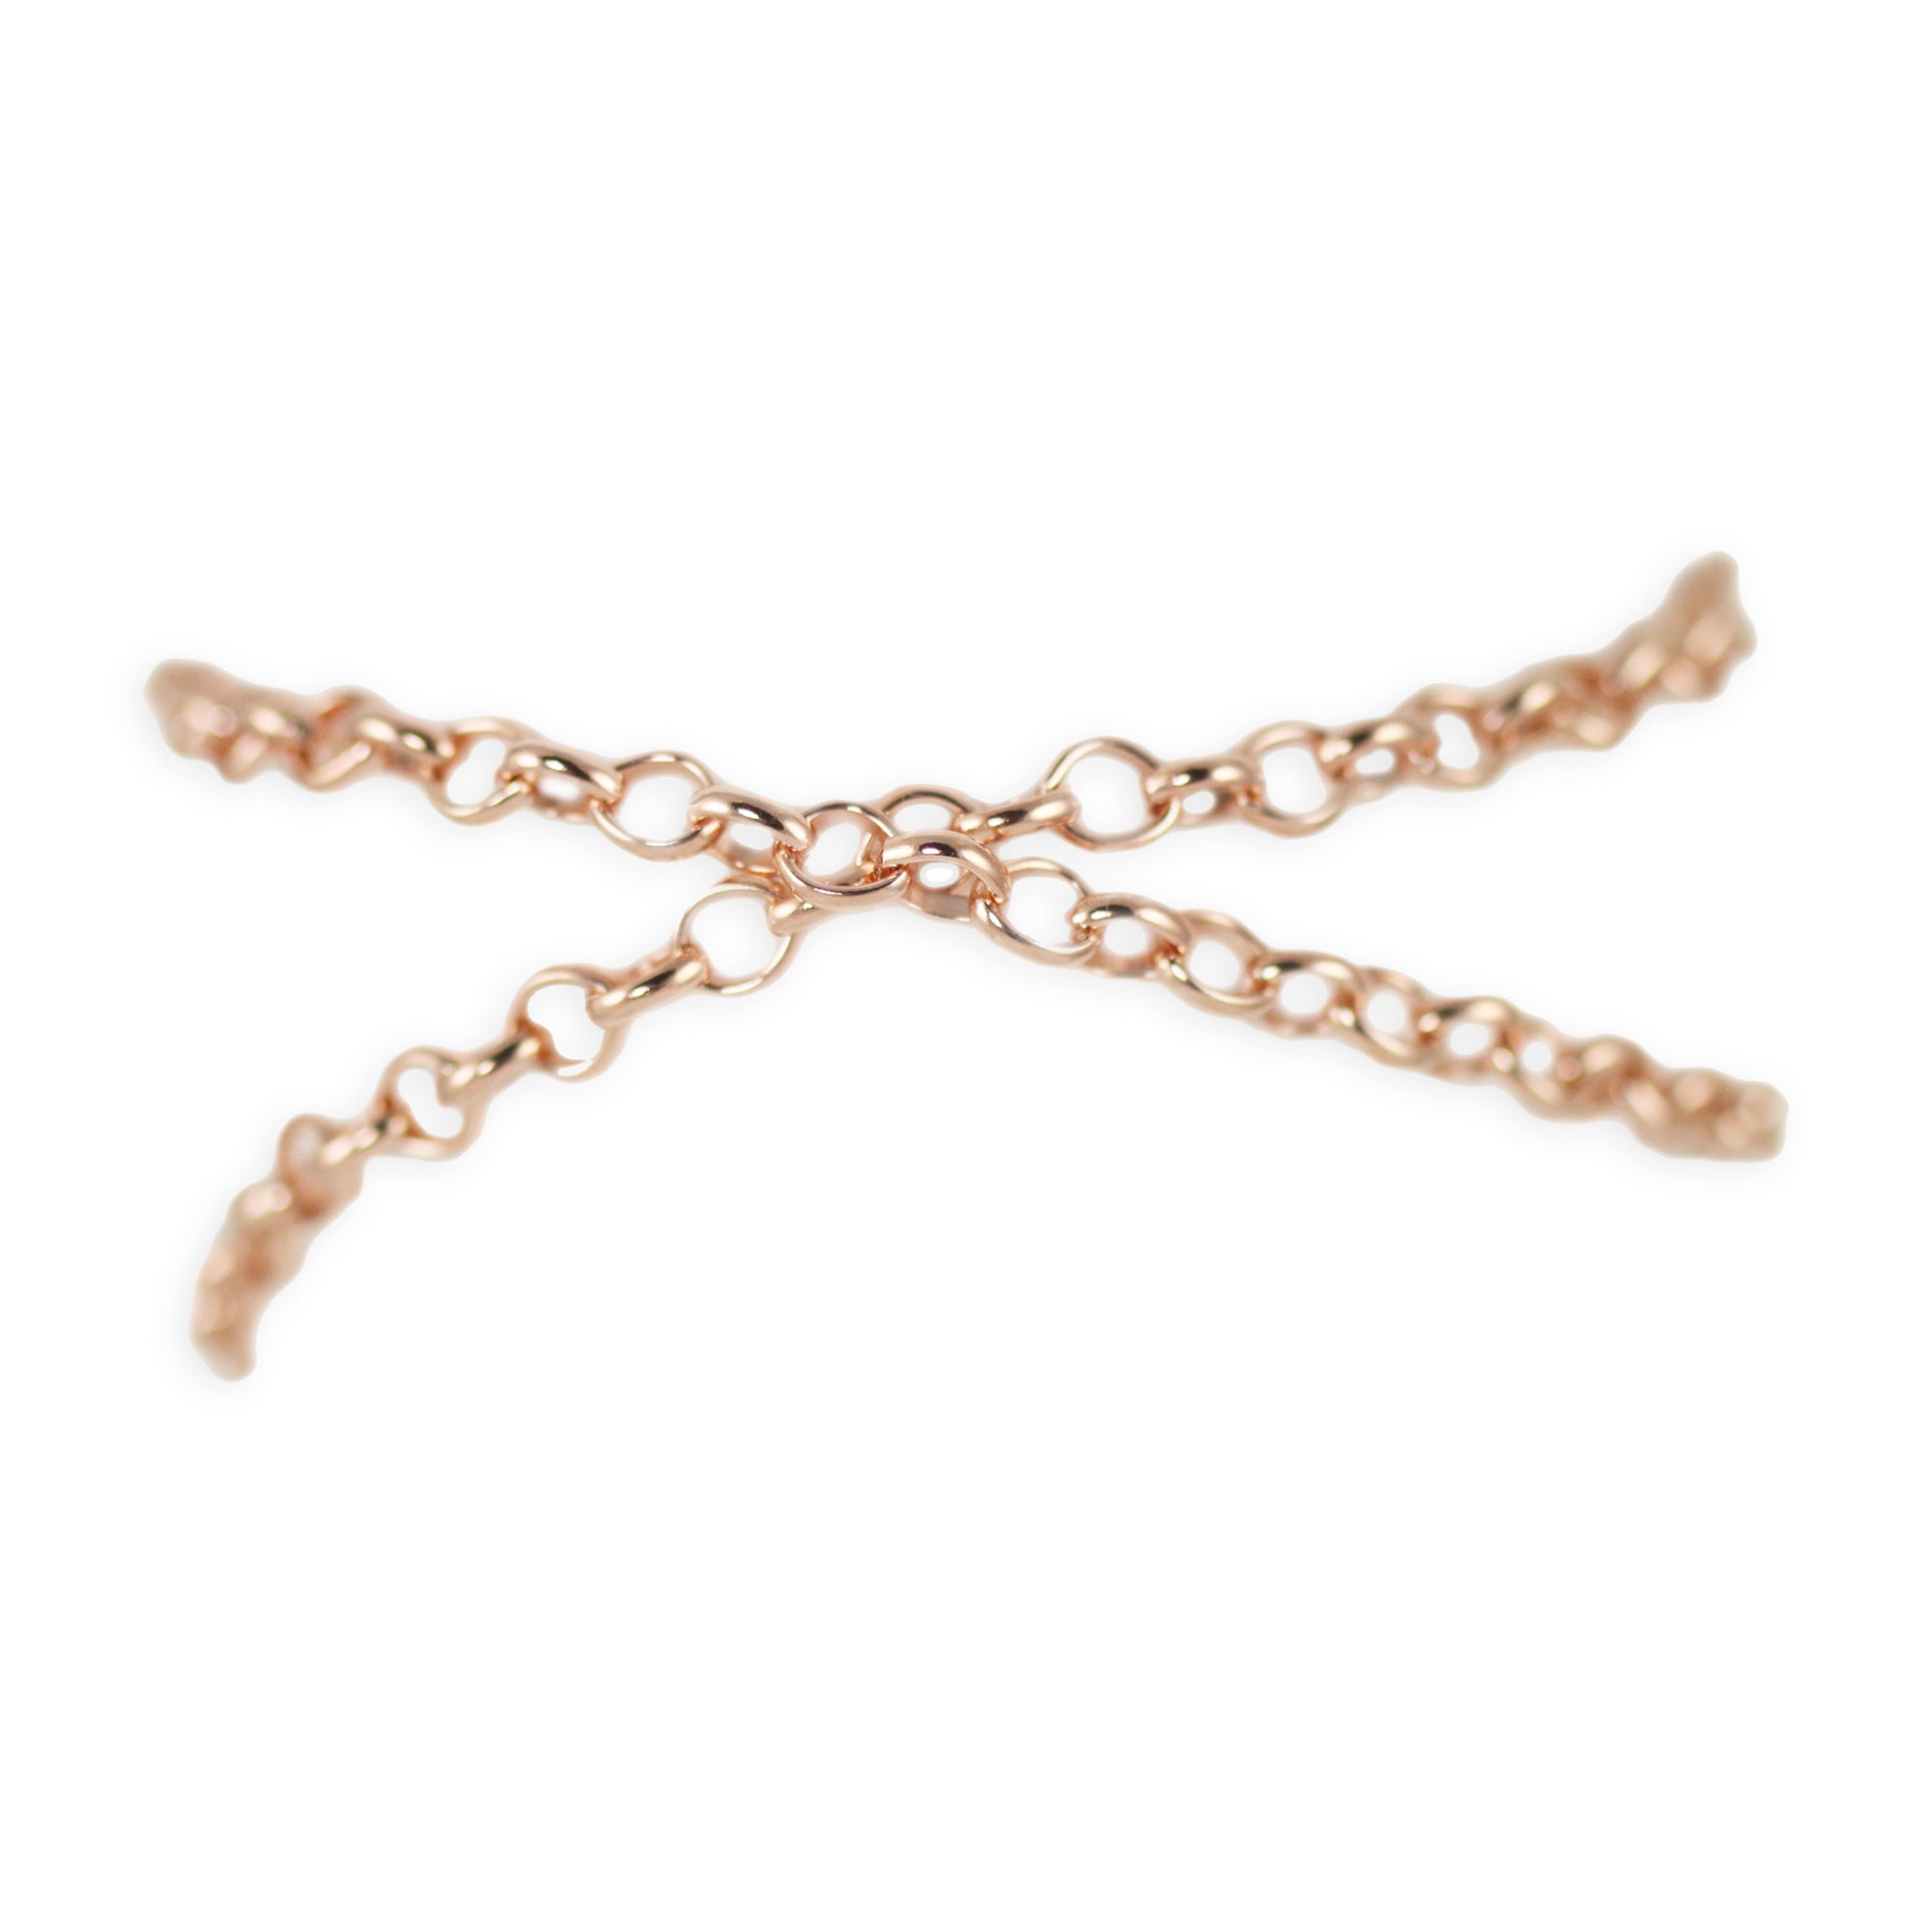 Charlie lace chain bracelet in rose gold with intricate details.